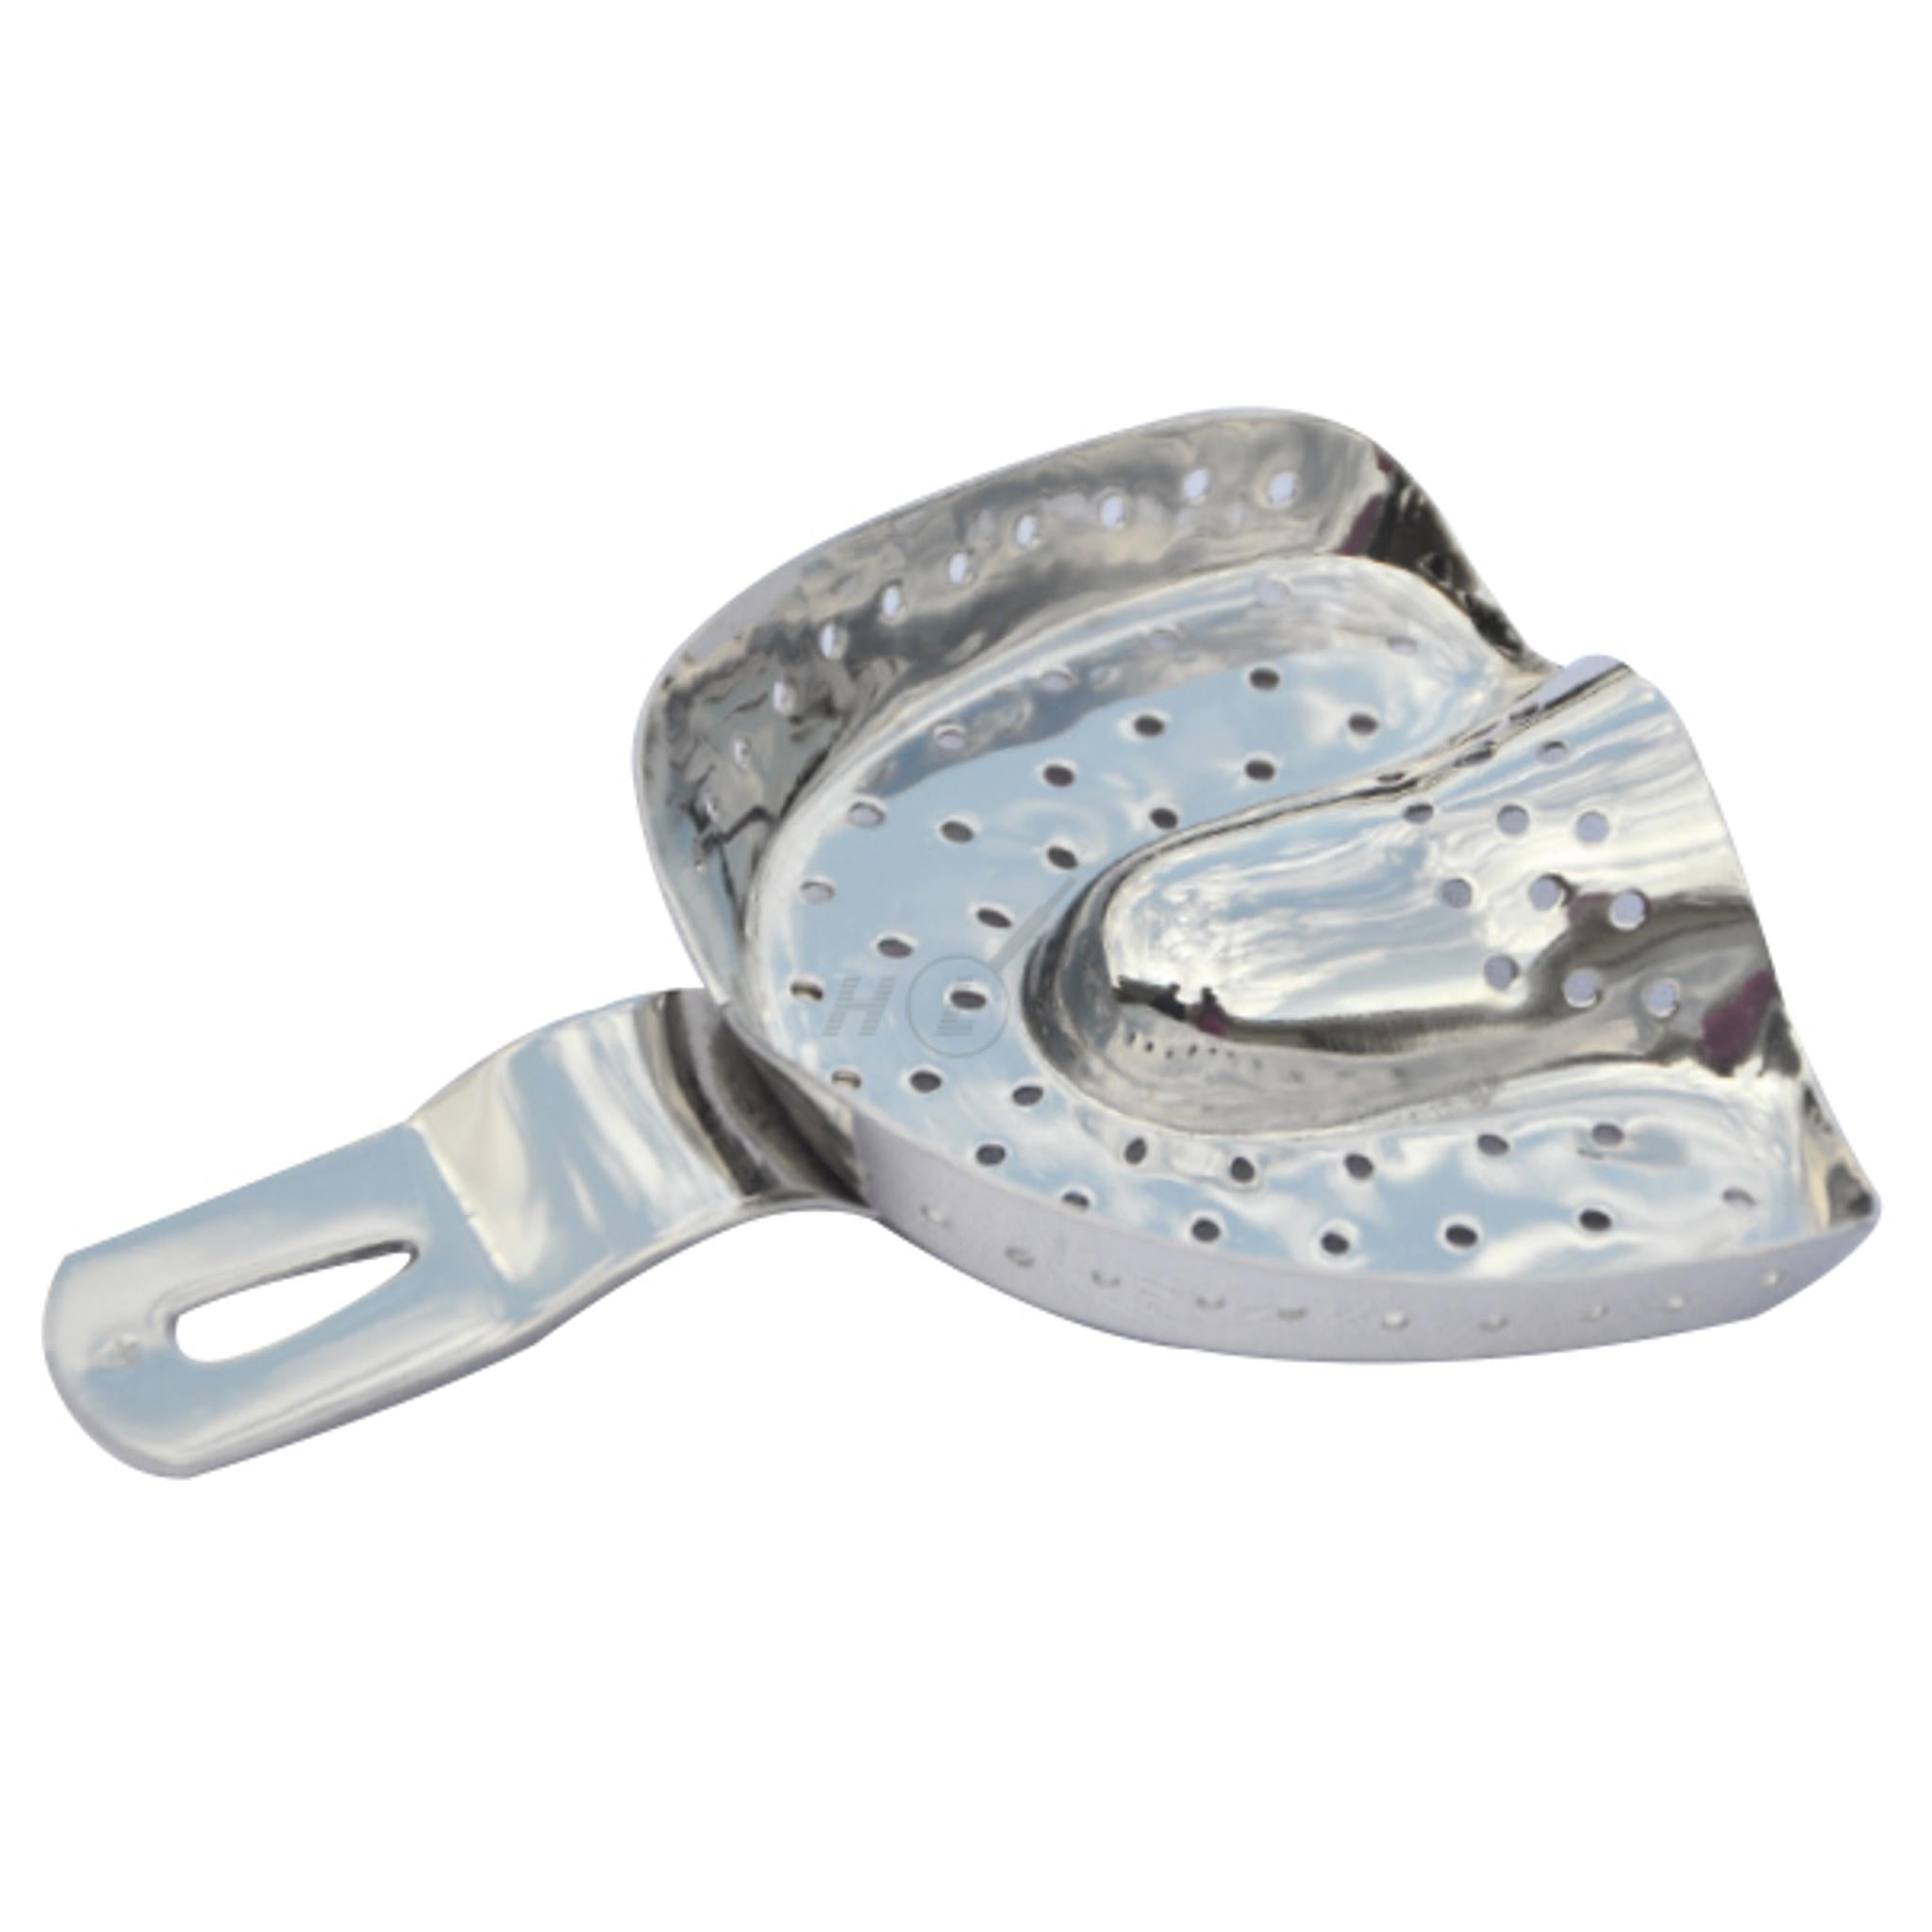 Ehricke impression tray<br> Perforated